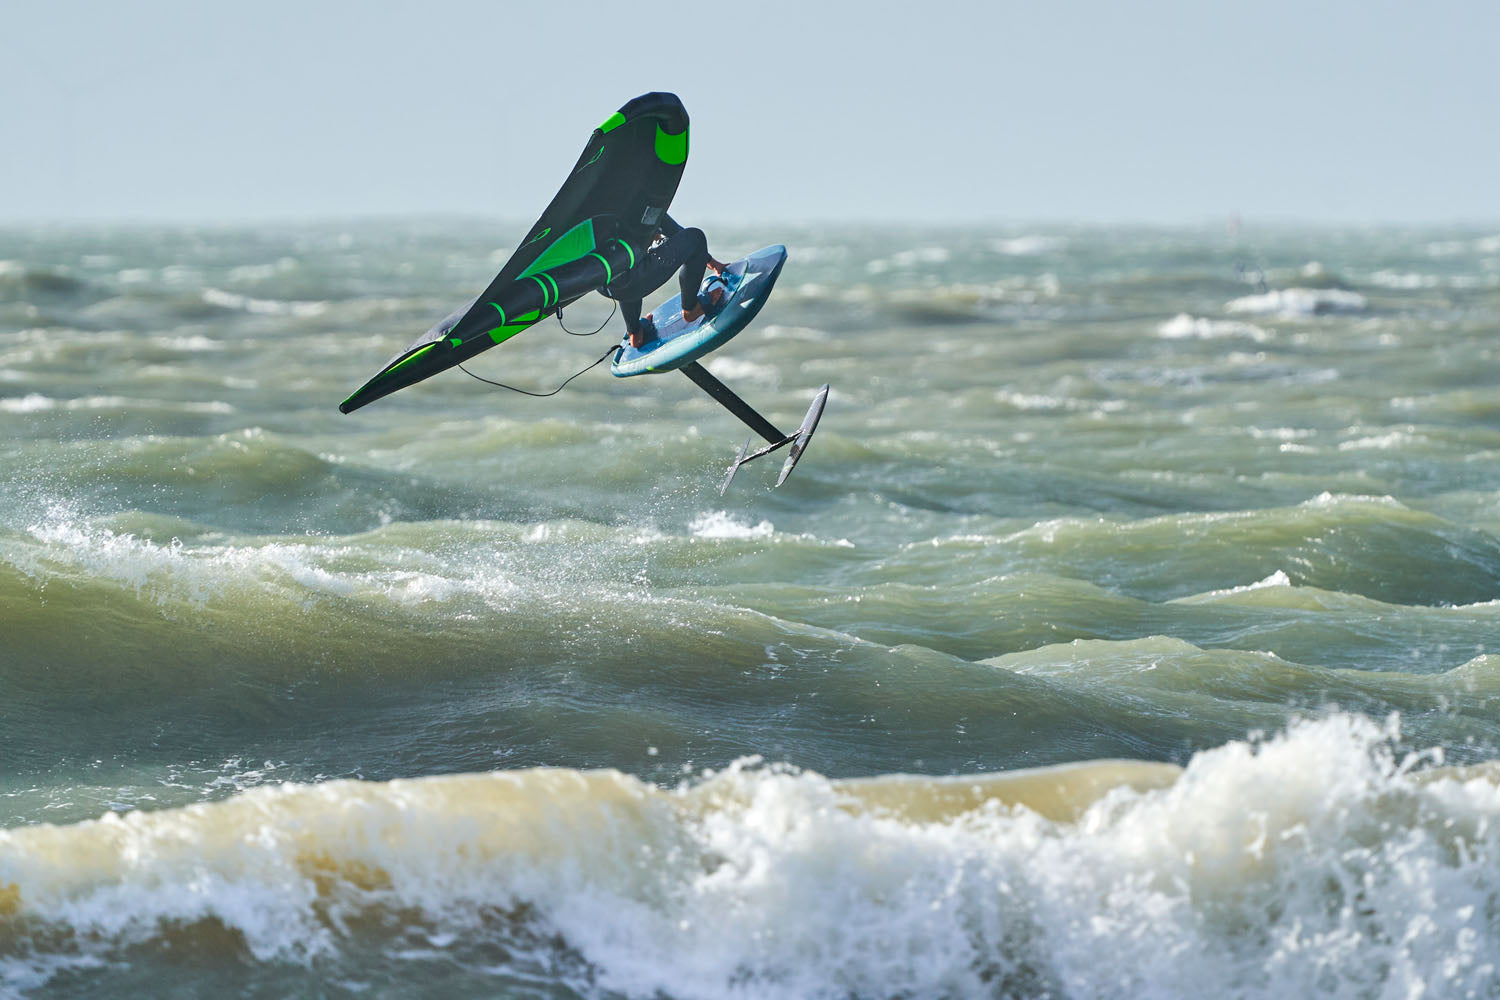 PHOTO: SENDING IT IN WAVE RIDING!